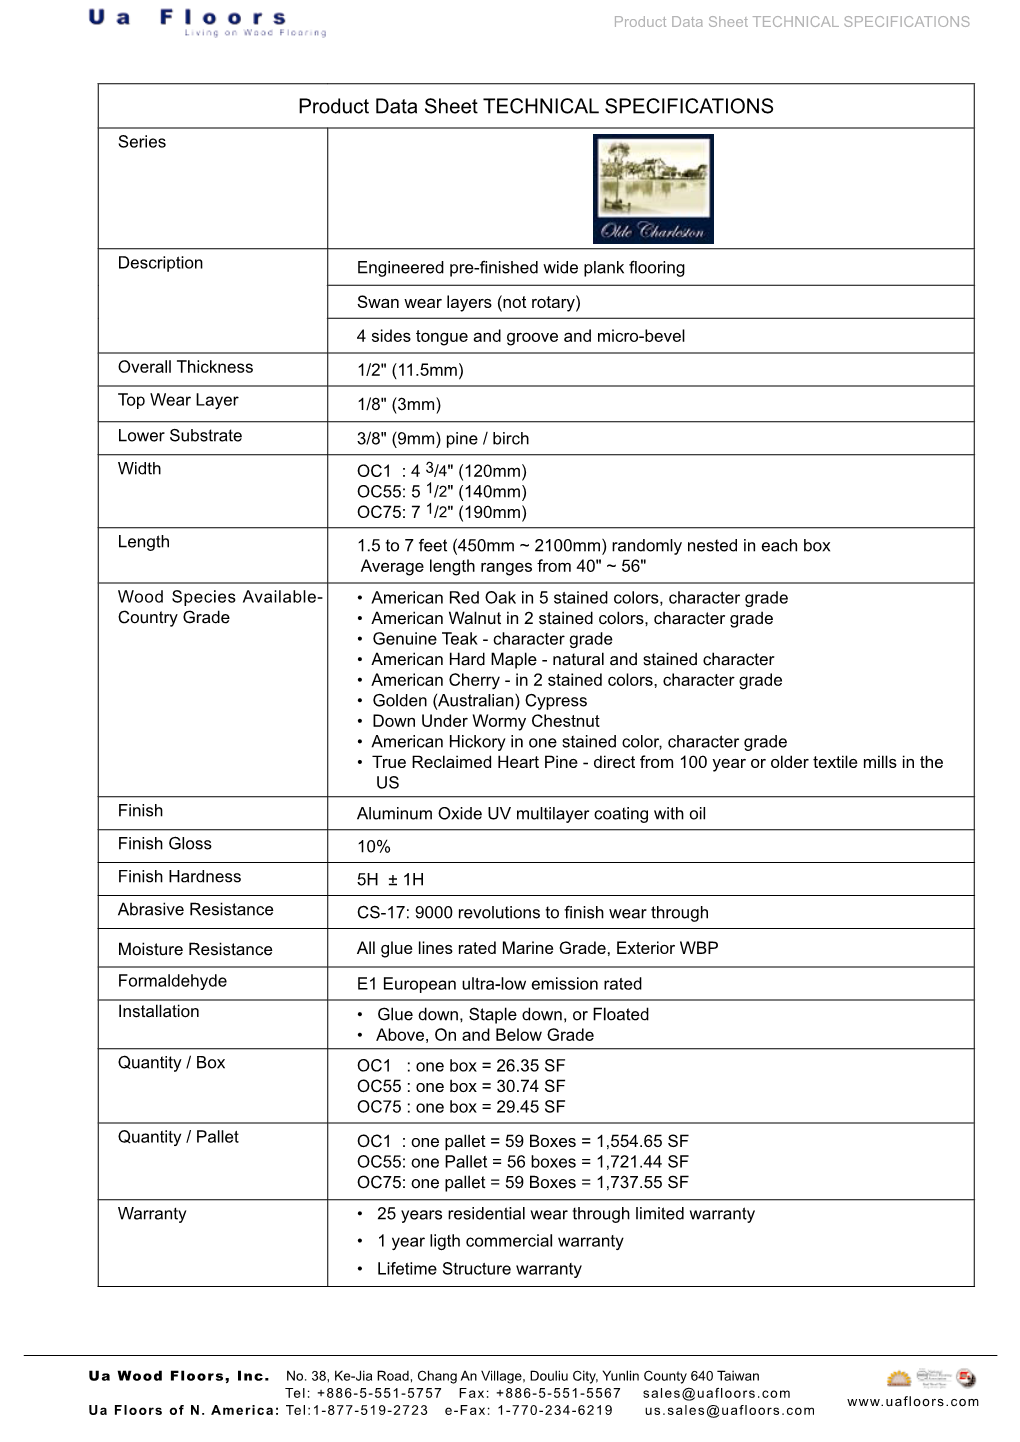 Product Data Sheet TECHNICAL SPECIFICATIONS